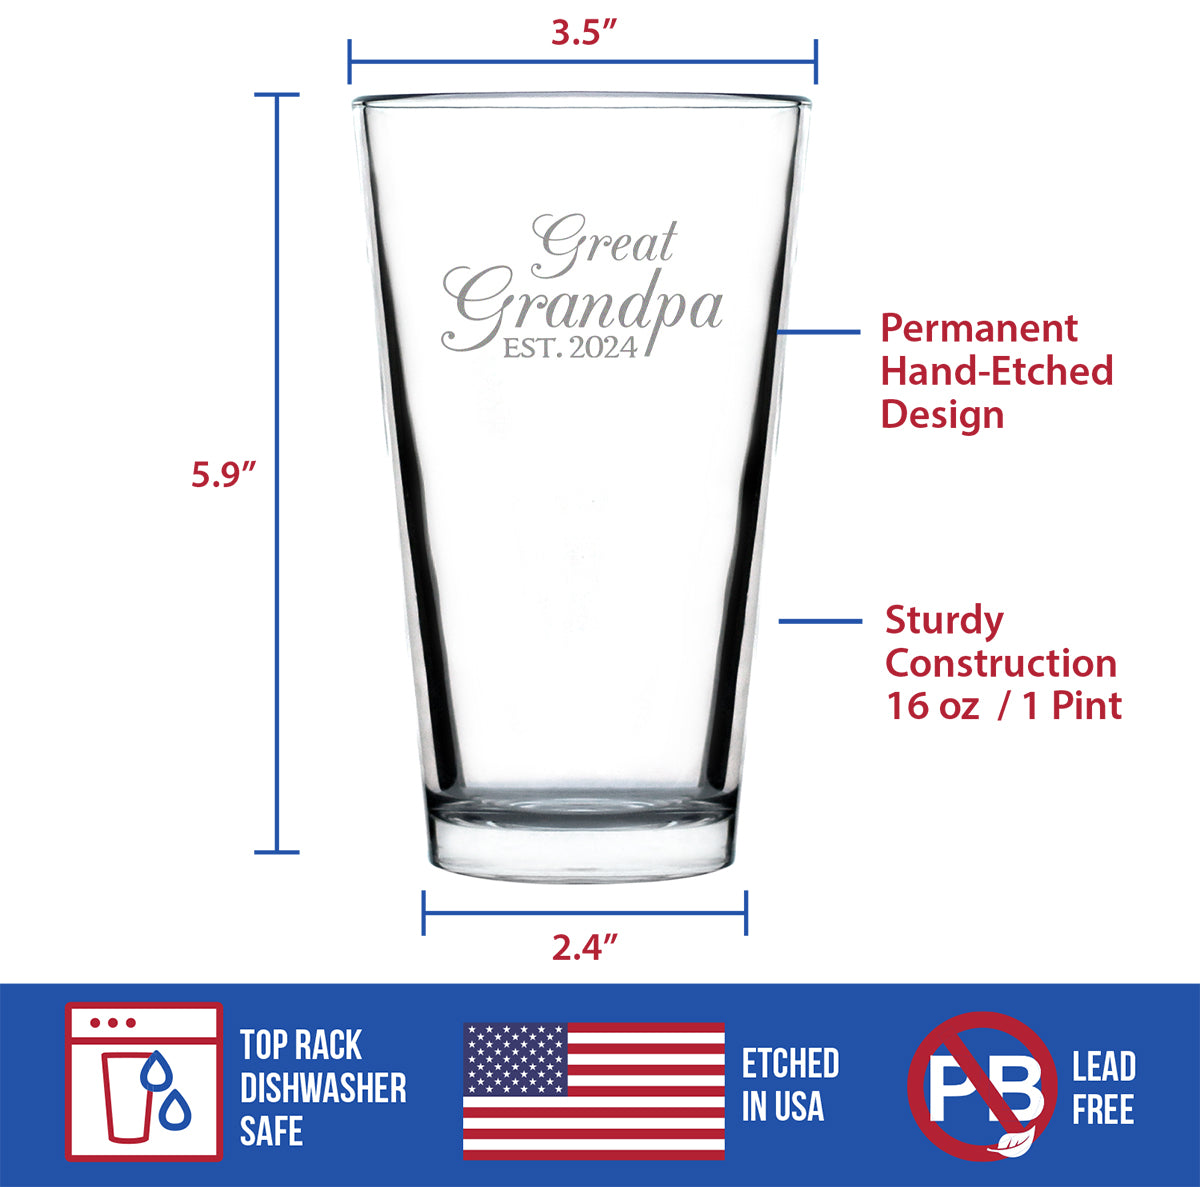 Great Grandpa Est 2024 - New Great Grandfather Pint Glass Gift for First Time Great Grandparents - Decorative 16 Oz Glasses